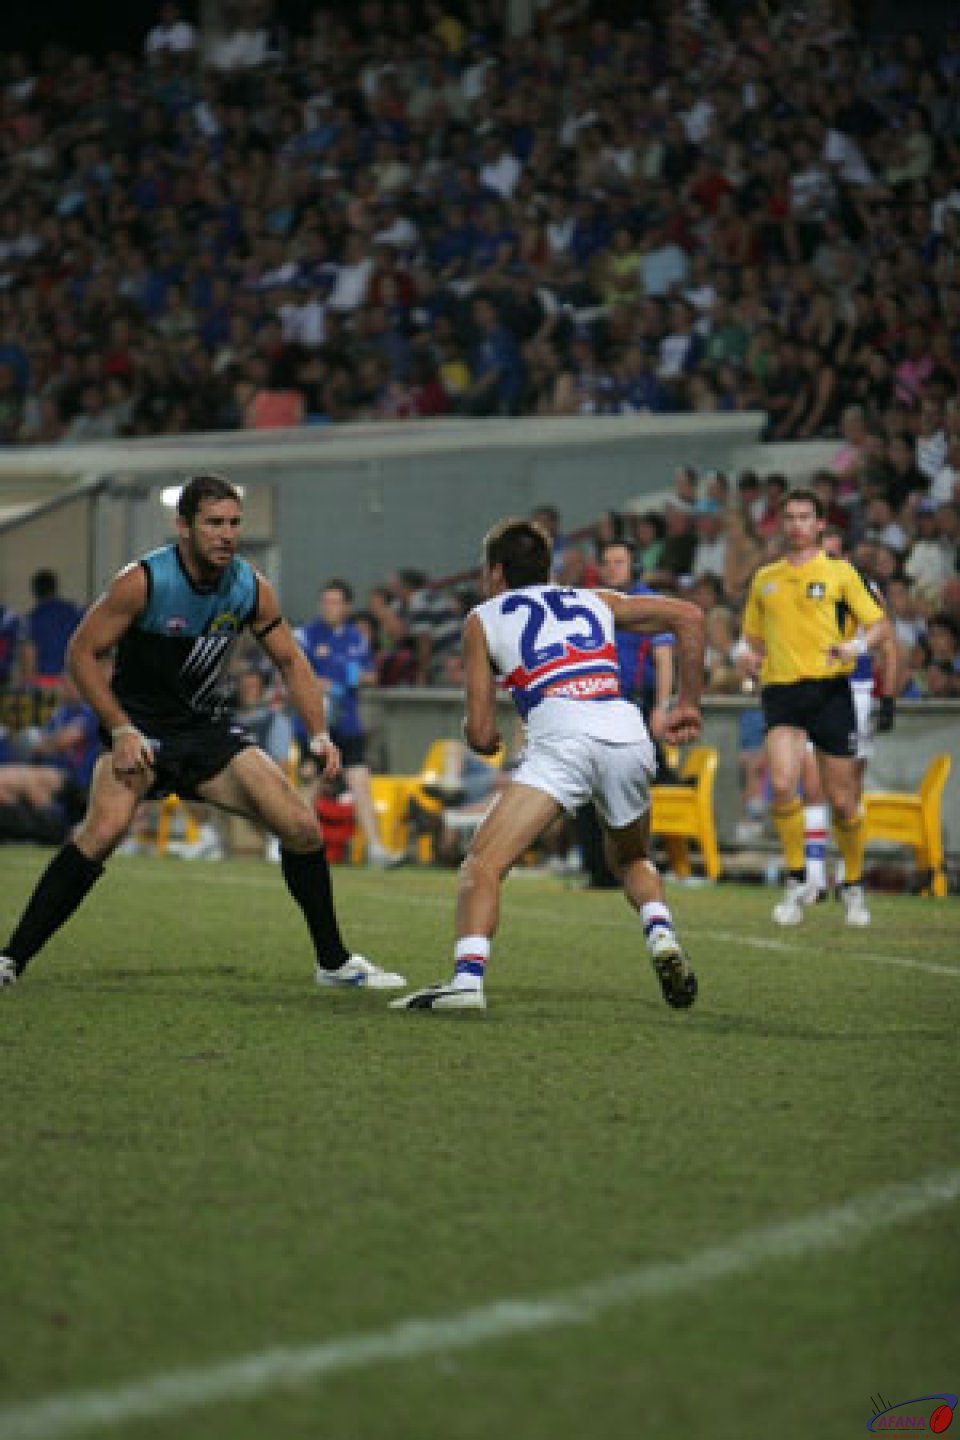 Action from Bulldogs v Port round 12